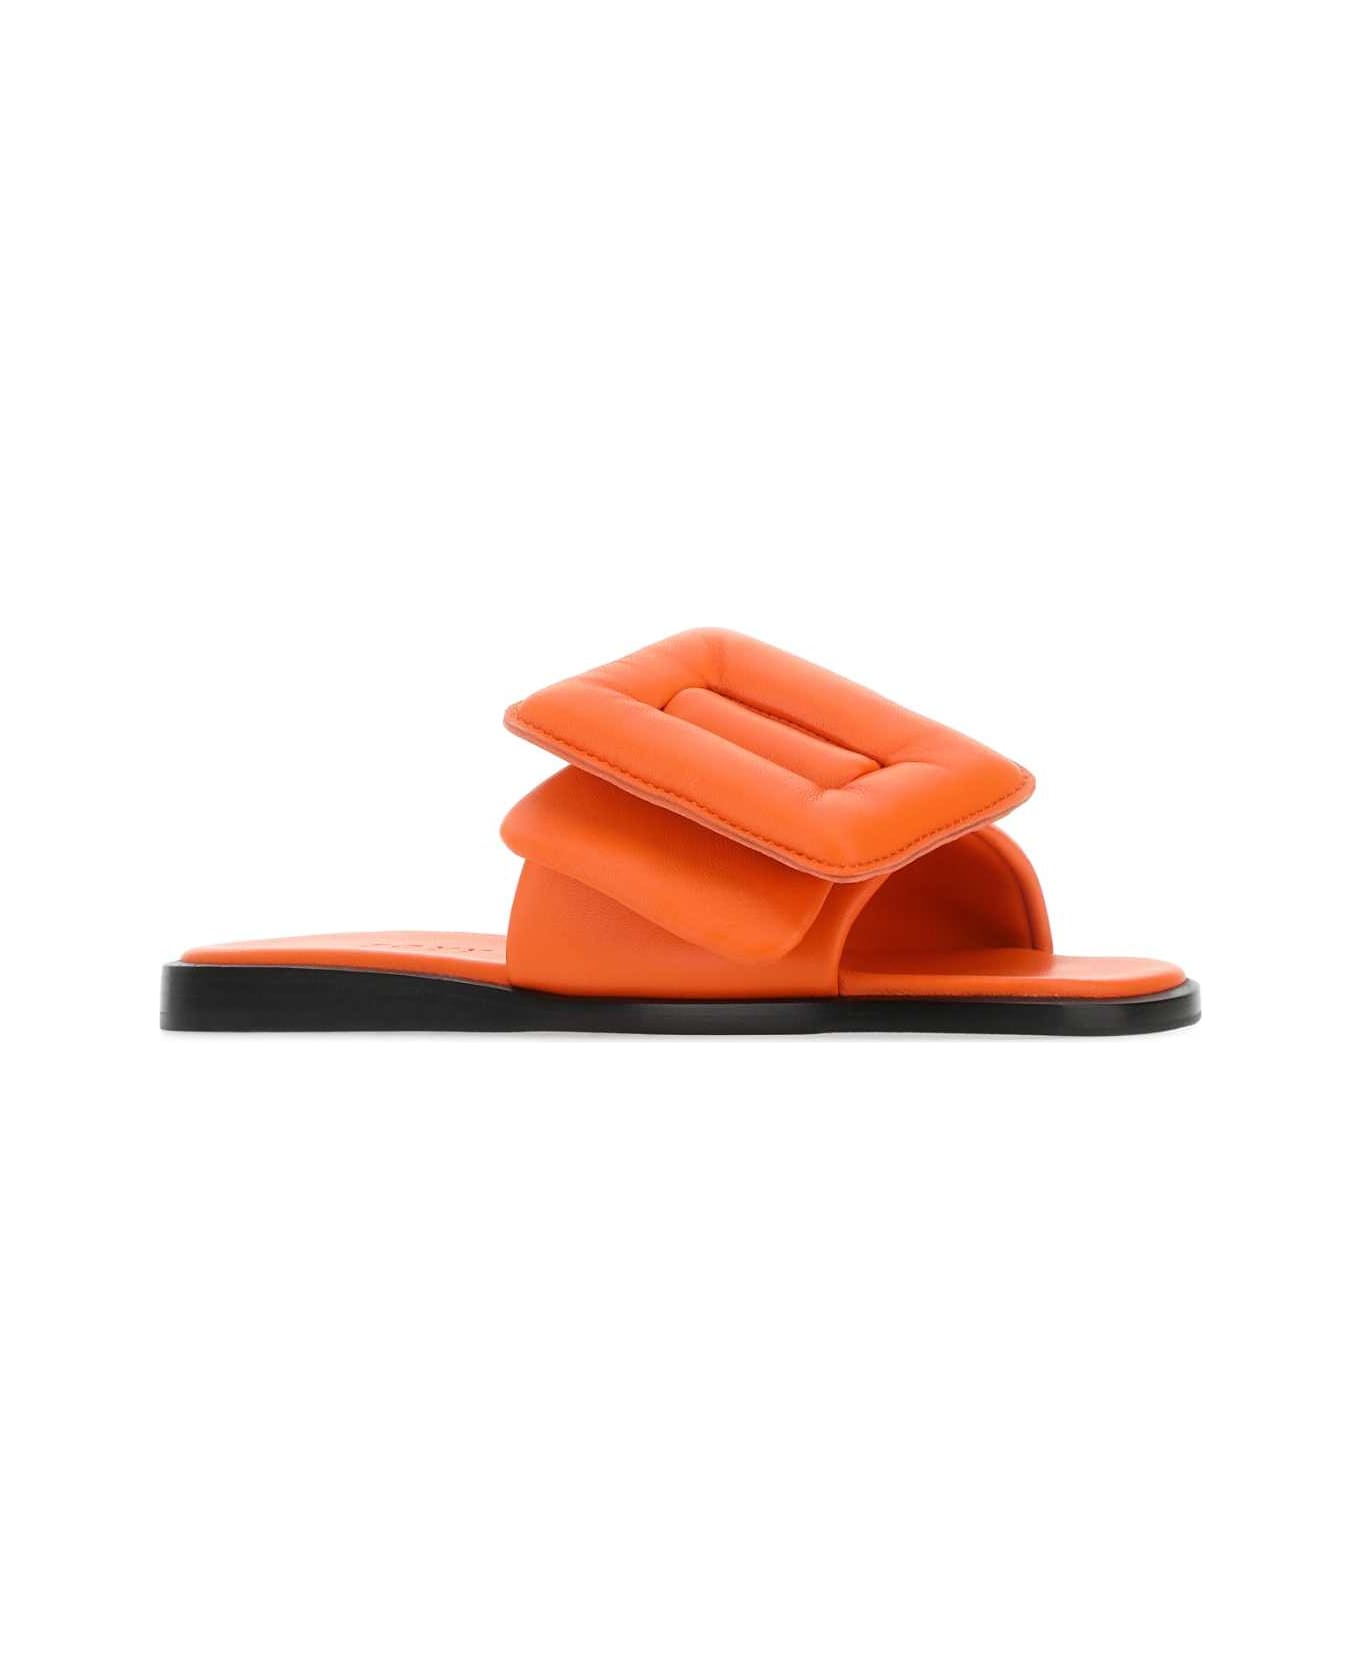 BOYY Orange Leather Puffy Slippers - PUFFINSBILL